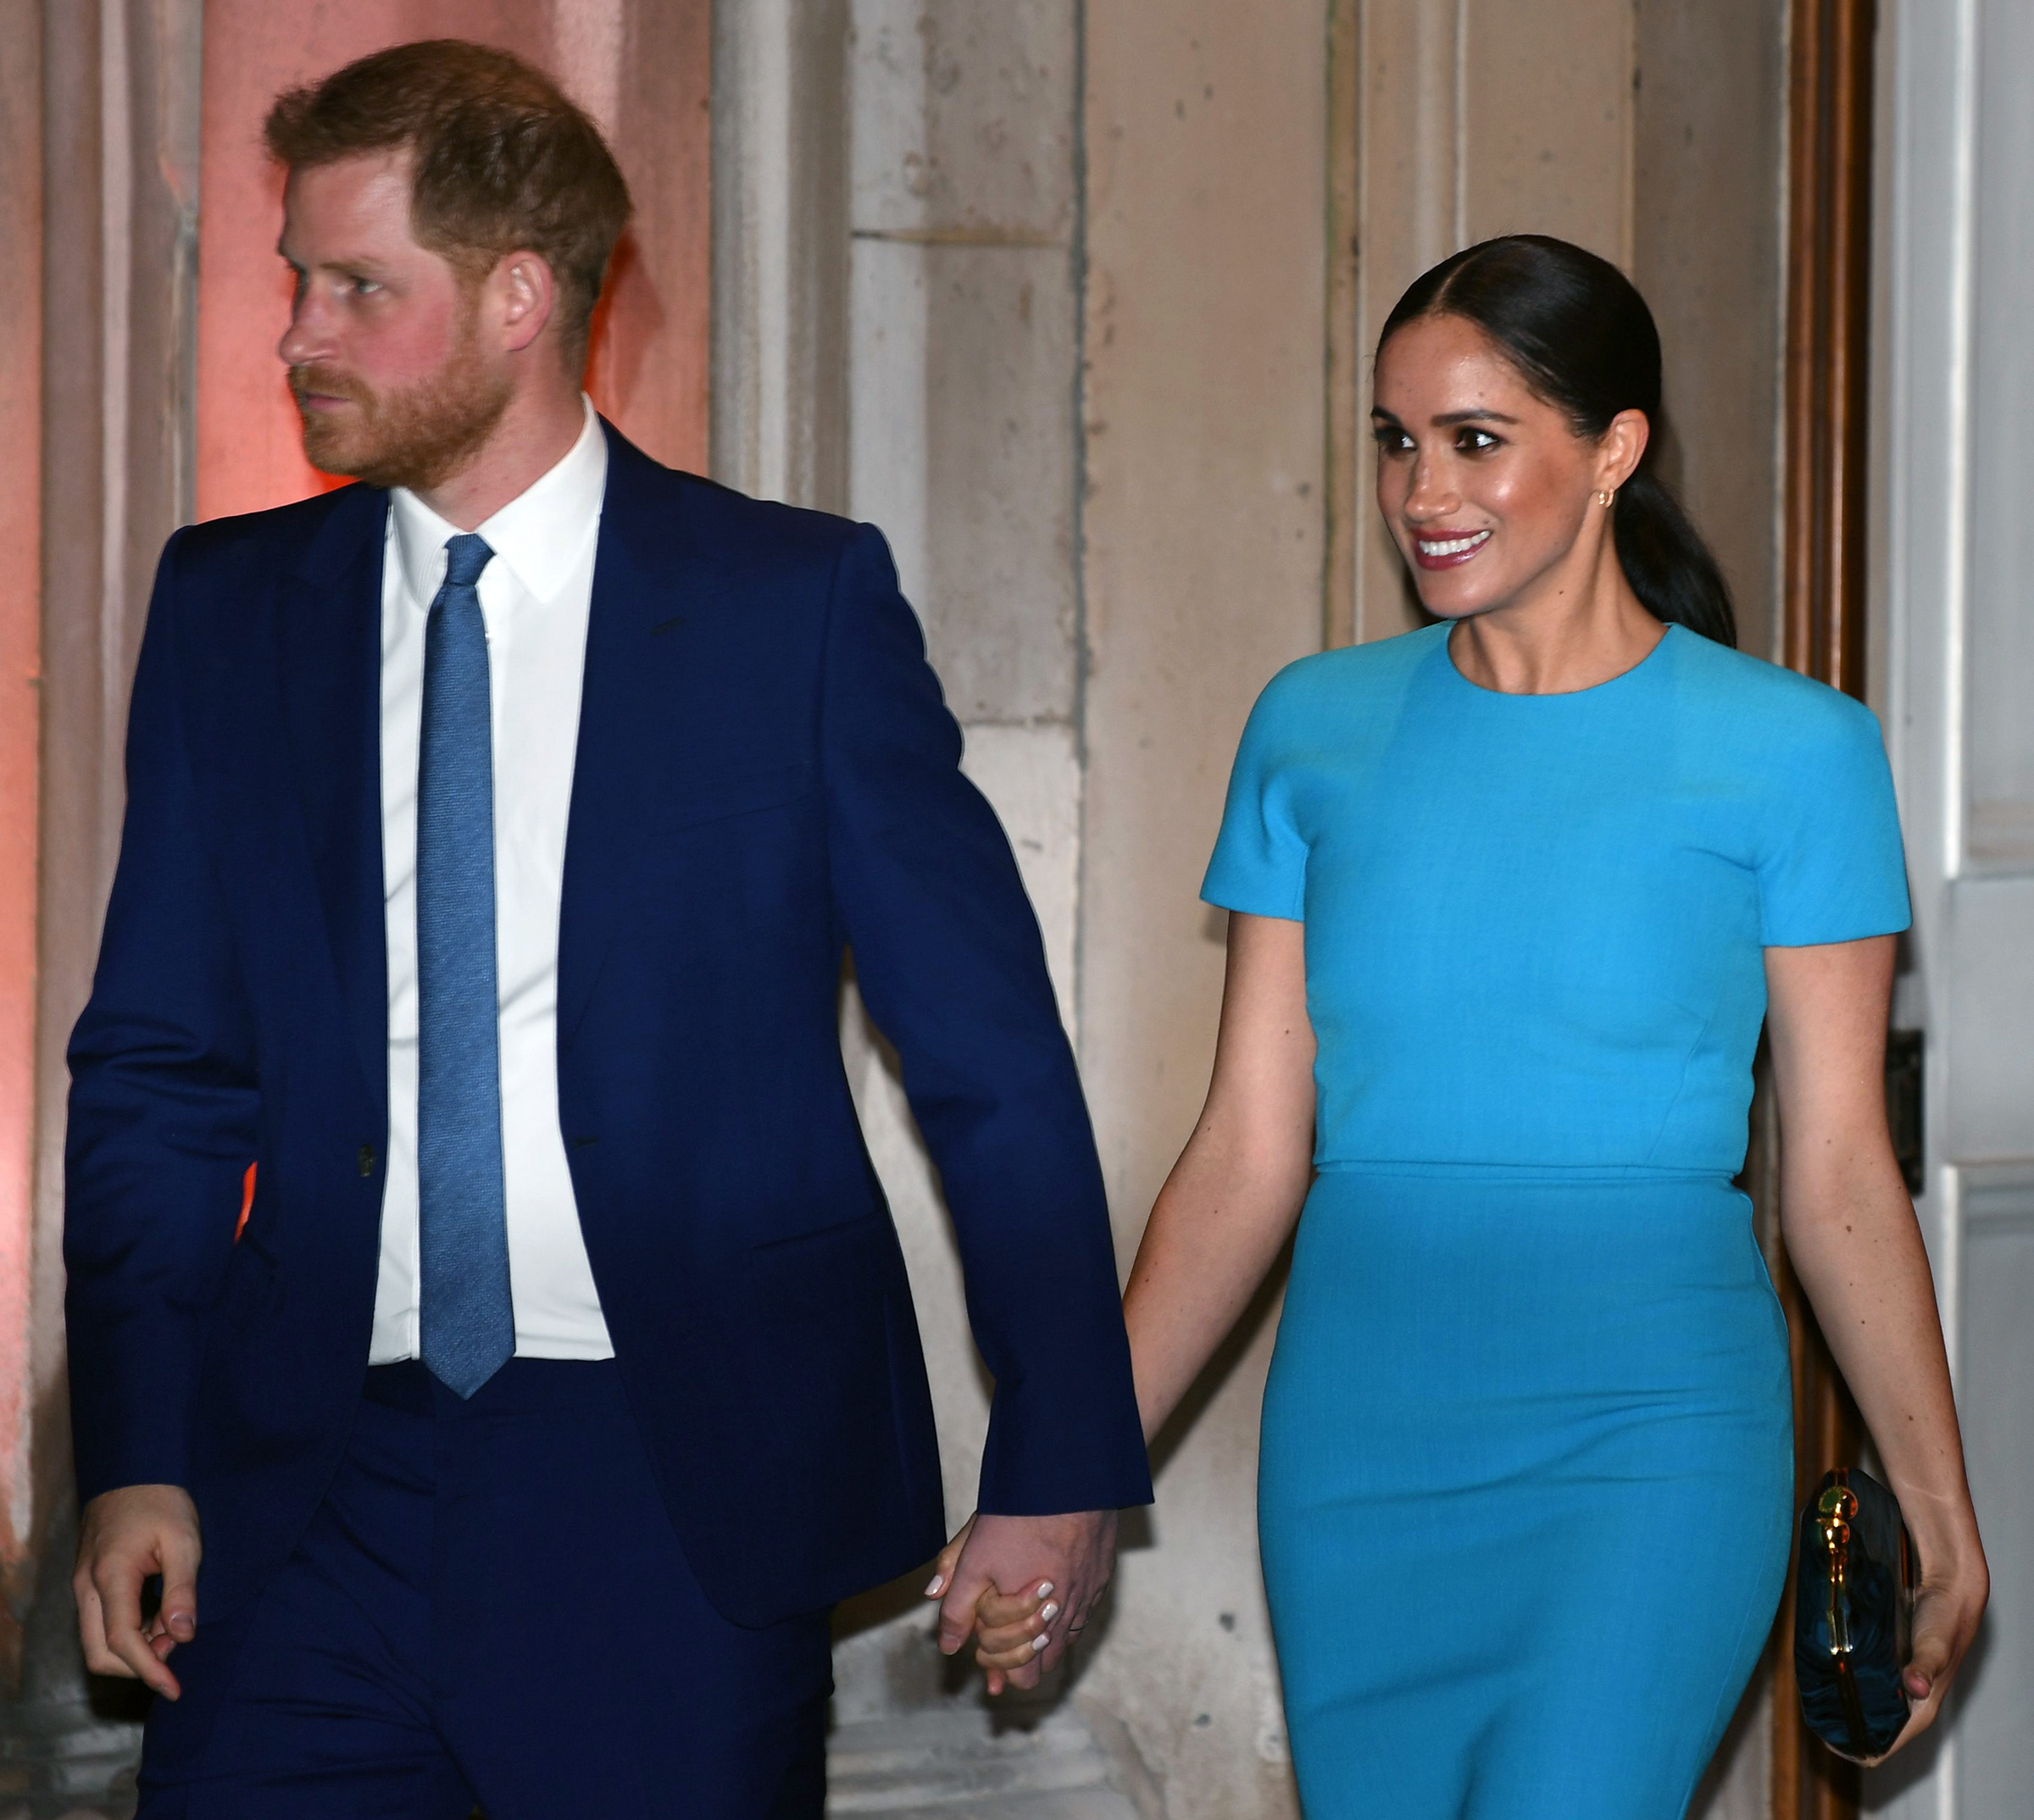 Prince Harry and Meghan Markle leave after attending the Endeavour Fund Awards at Mansion House in London on March 5, 2020. (Daniel Leal-Olivas—AFP/Getty Images)